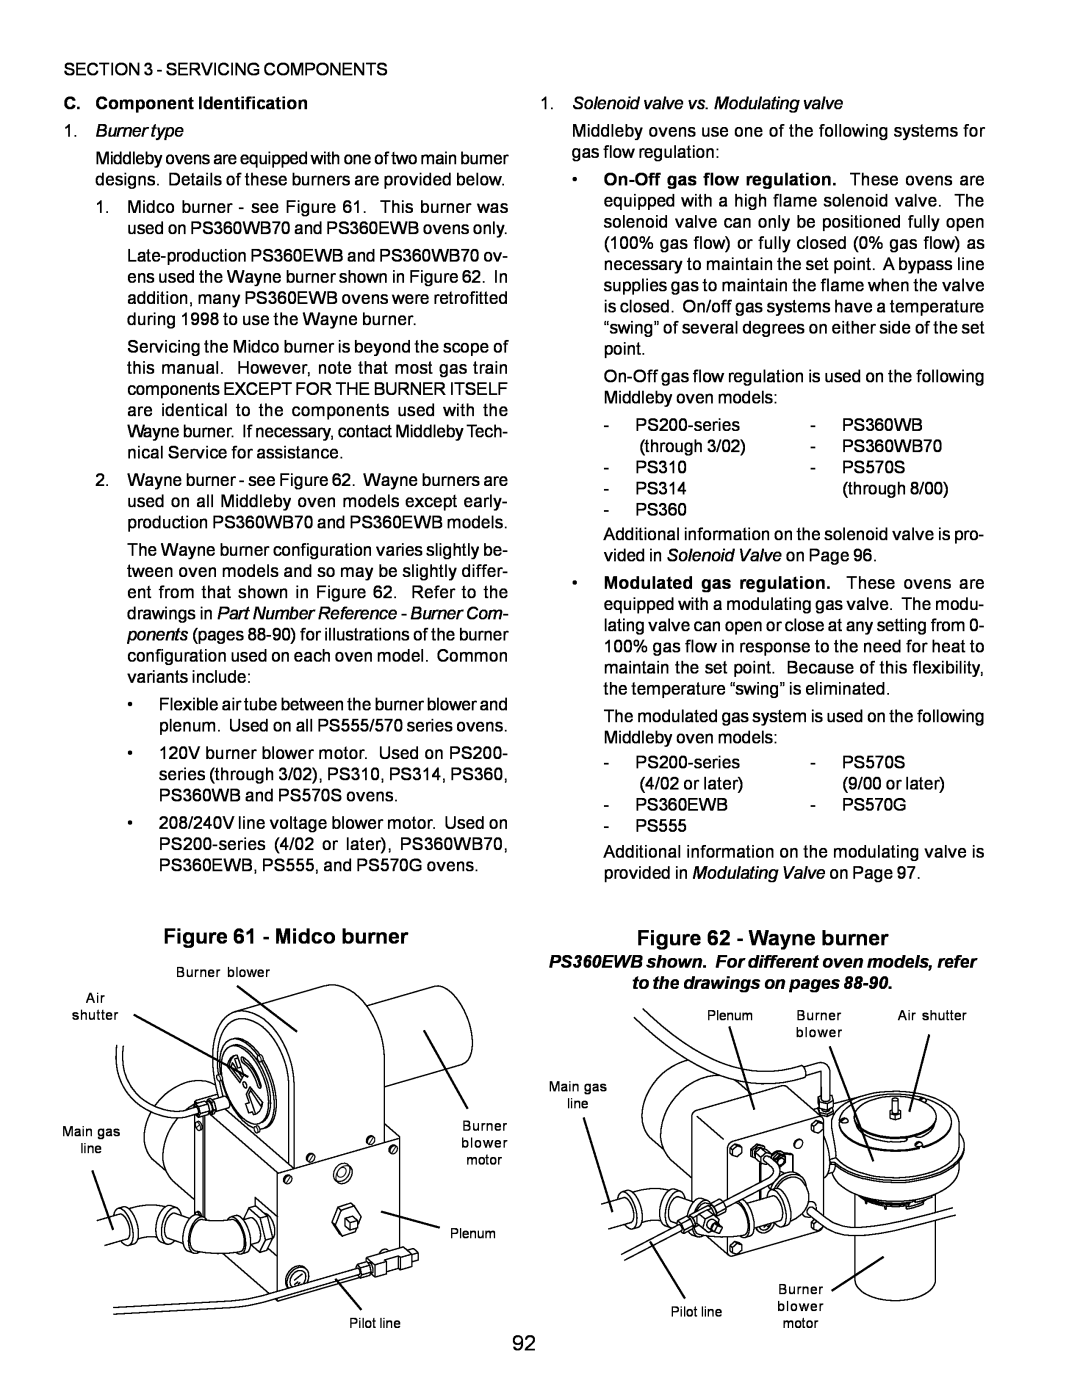 Middleby Marshall PS555 Midco burner, Wayne burner, C. Component Identification, Burner type, to the drawings on pages 